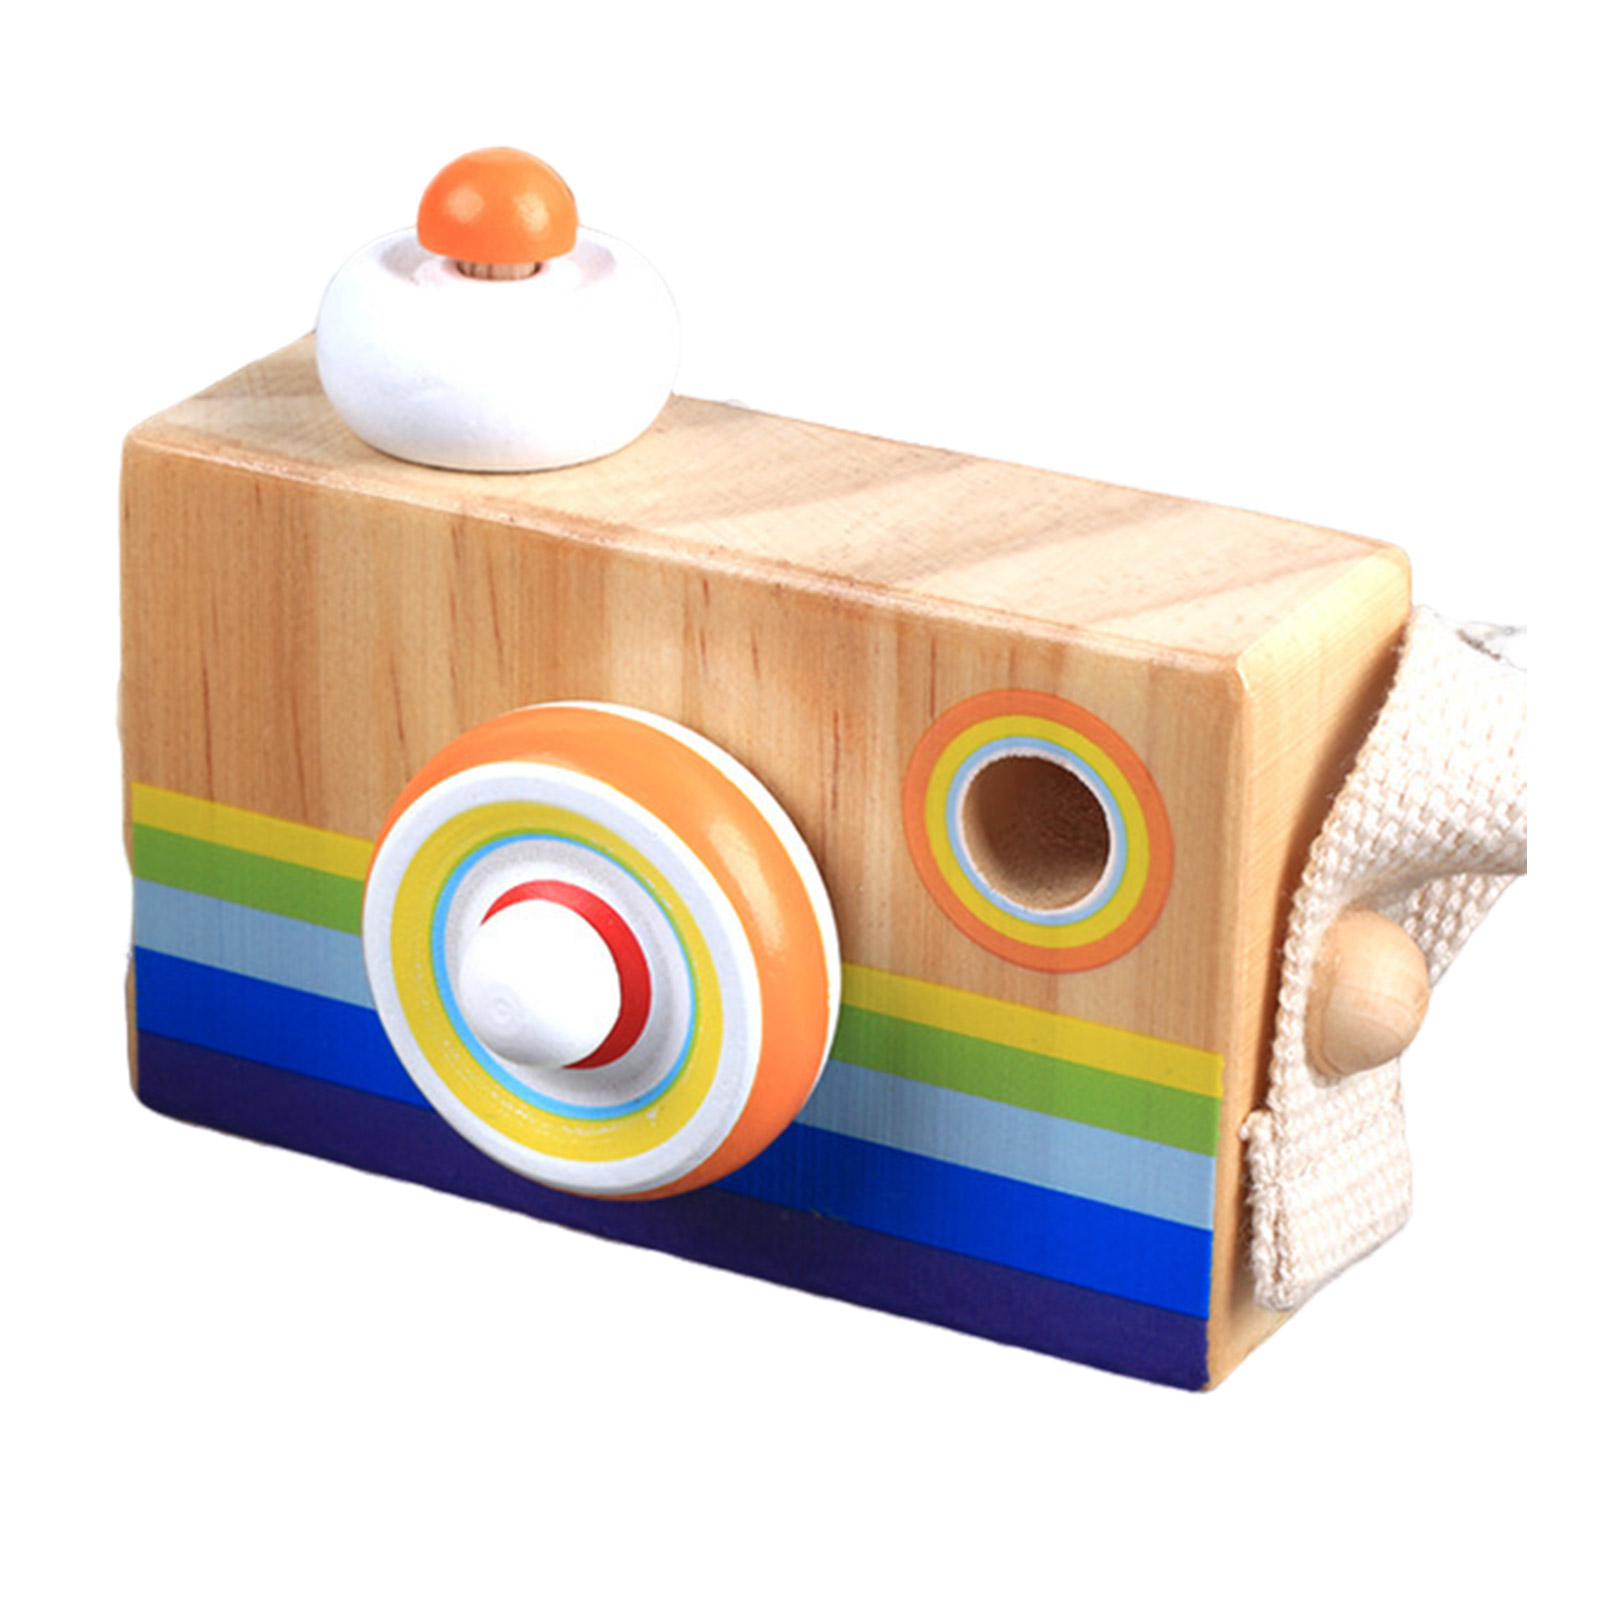 UHH Mini Wooden Camera with Kaleidoscope Lens Children Wooden Camera Toy